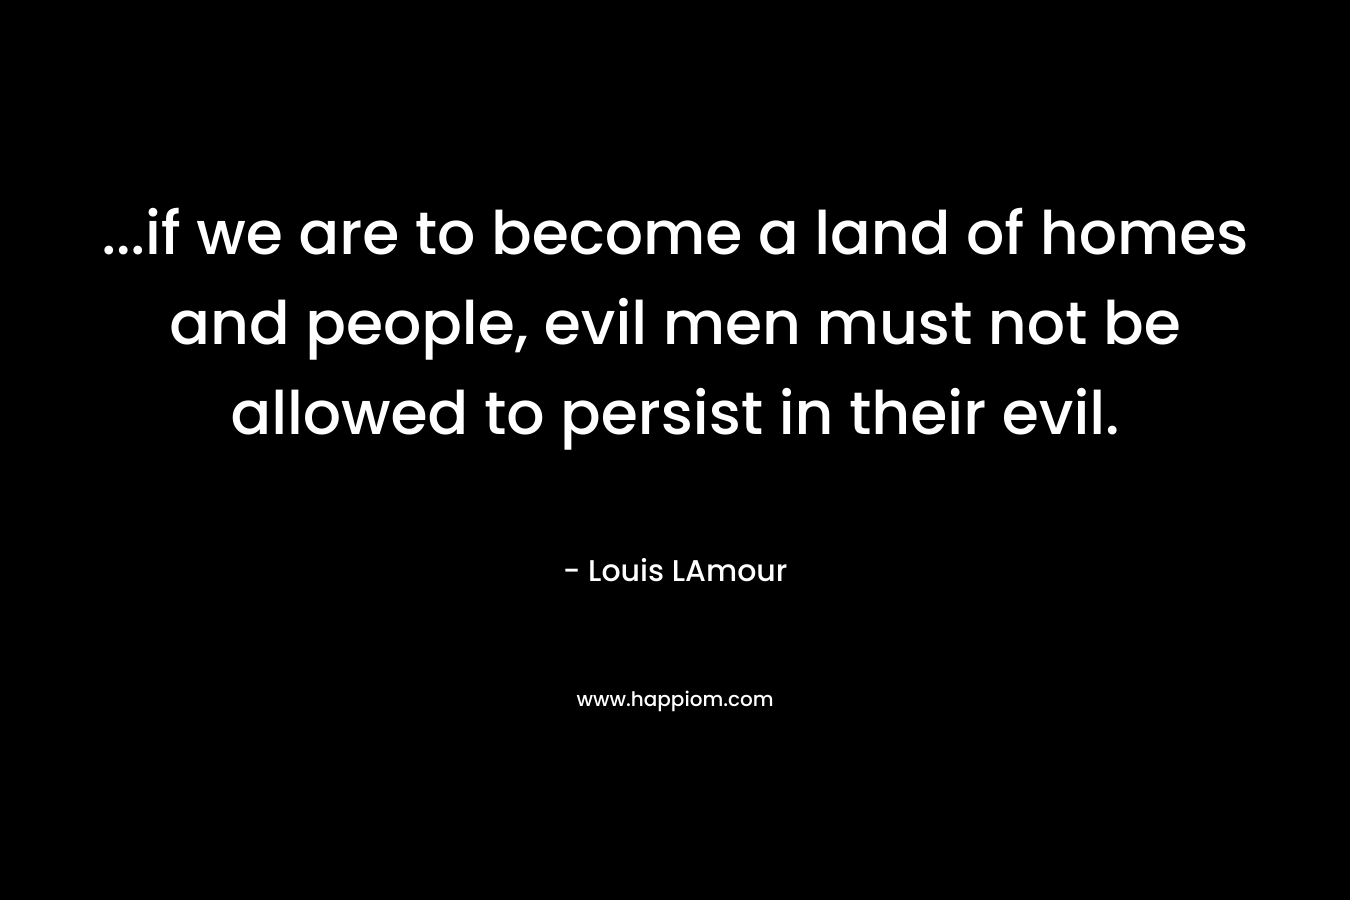 …if we are to become a land of homes and people, evil men must not be allowed to persist in their evil. – Louis LAmour